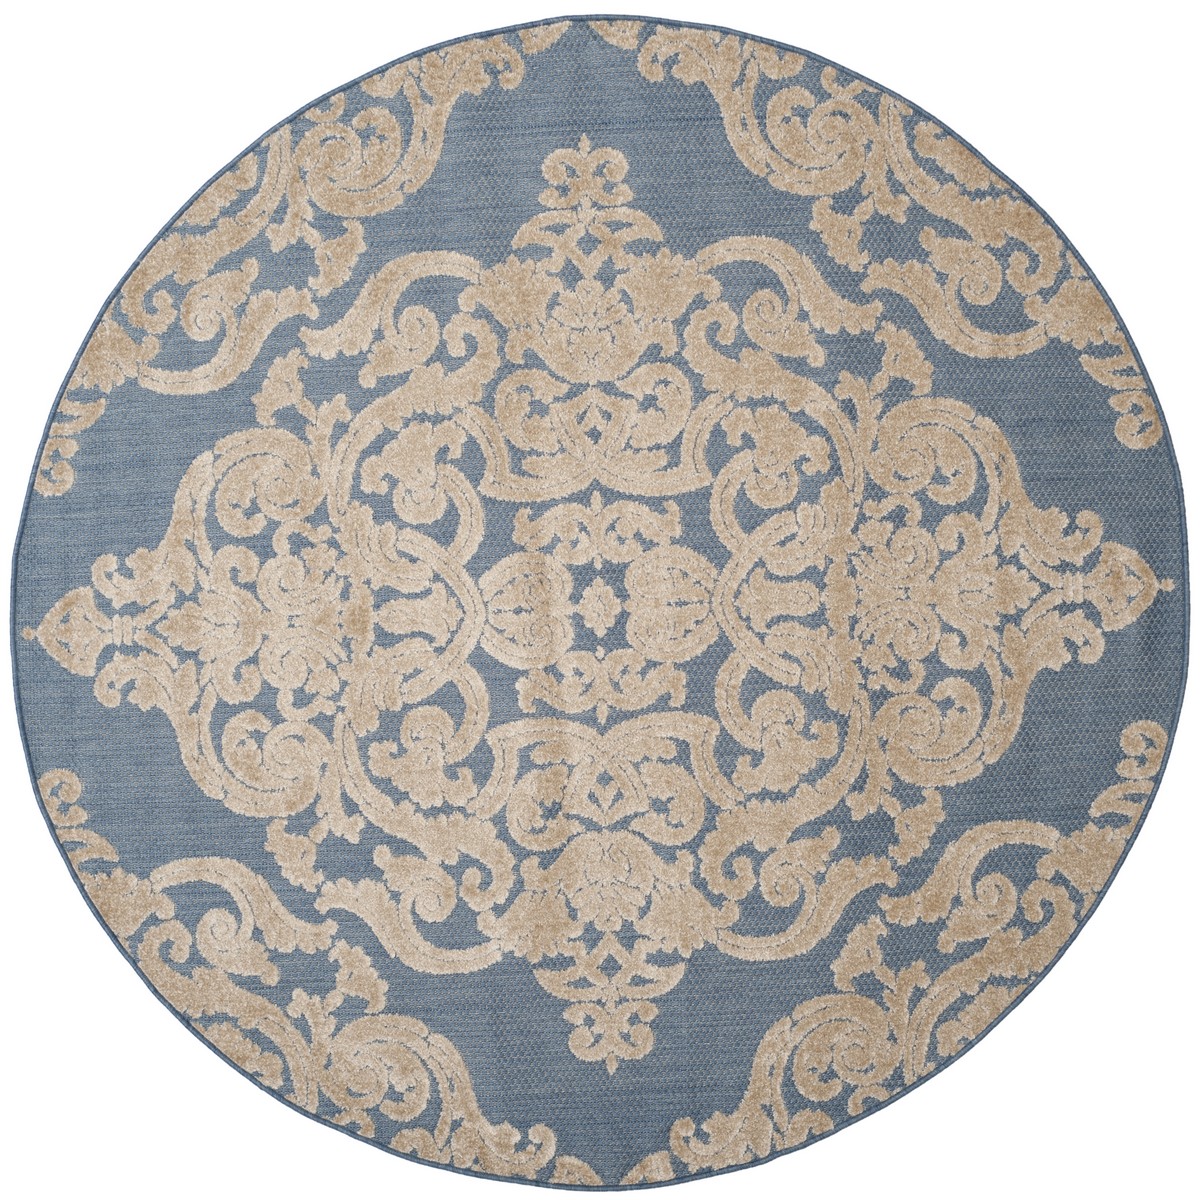 Mnr152a-7r Monroe Round Area Rug, Blue - 6 Ft.-7 In. X 6 Ft.-7 In.